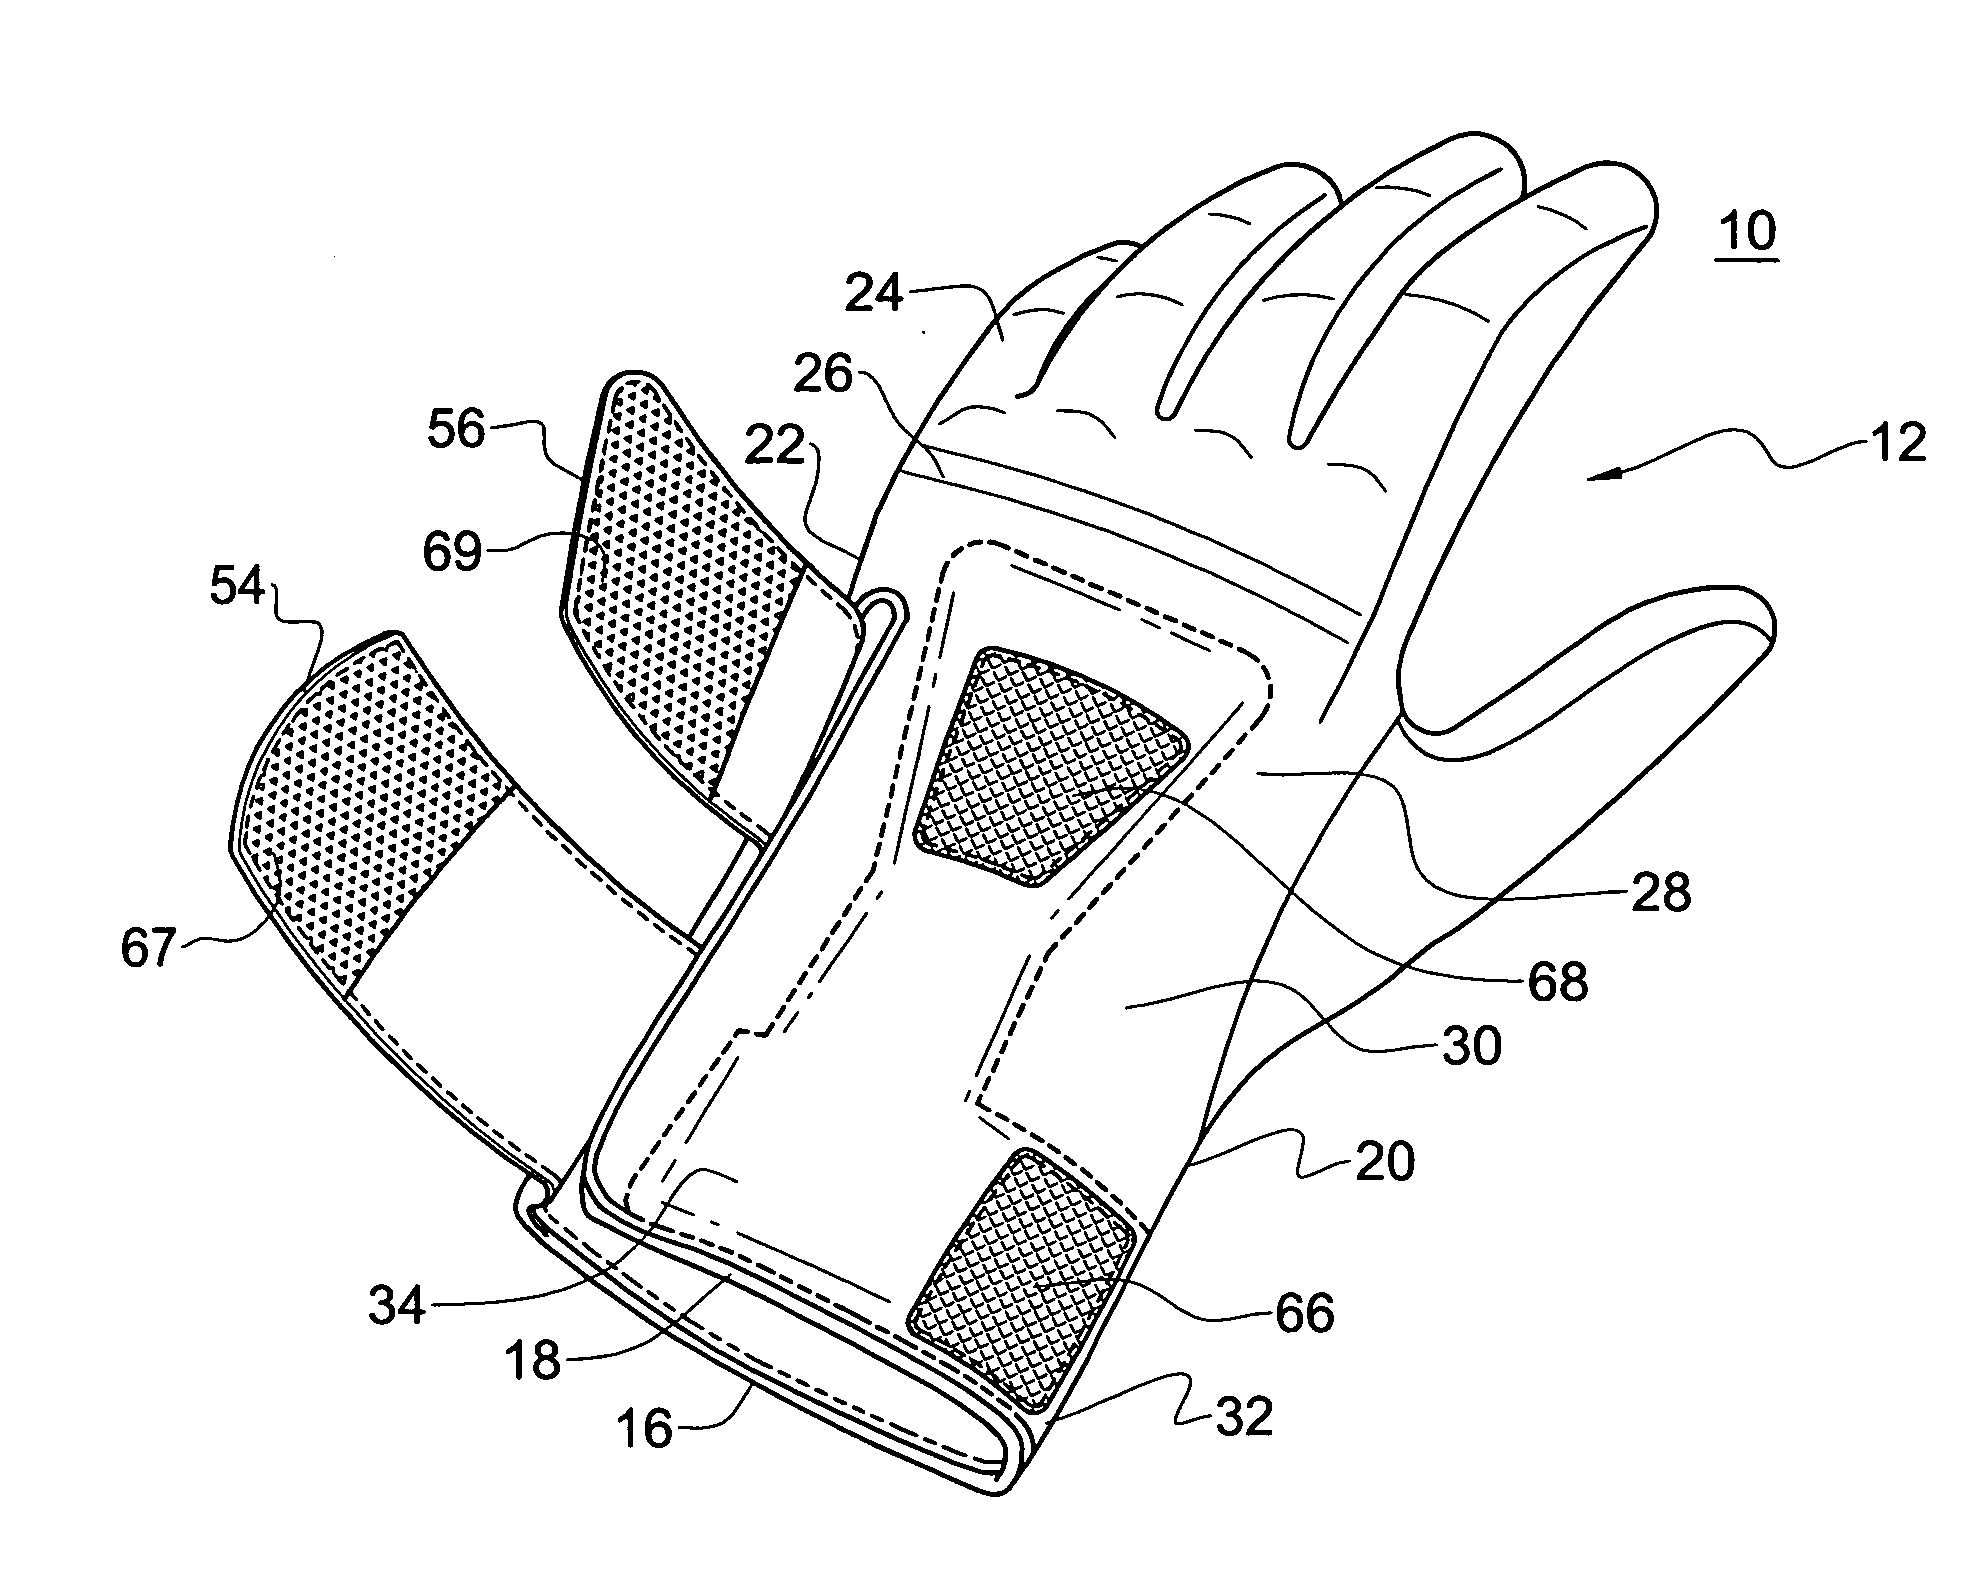 Golf glove for promoting swing accuracy